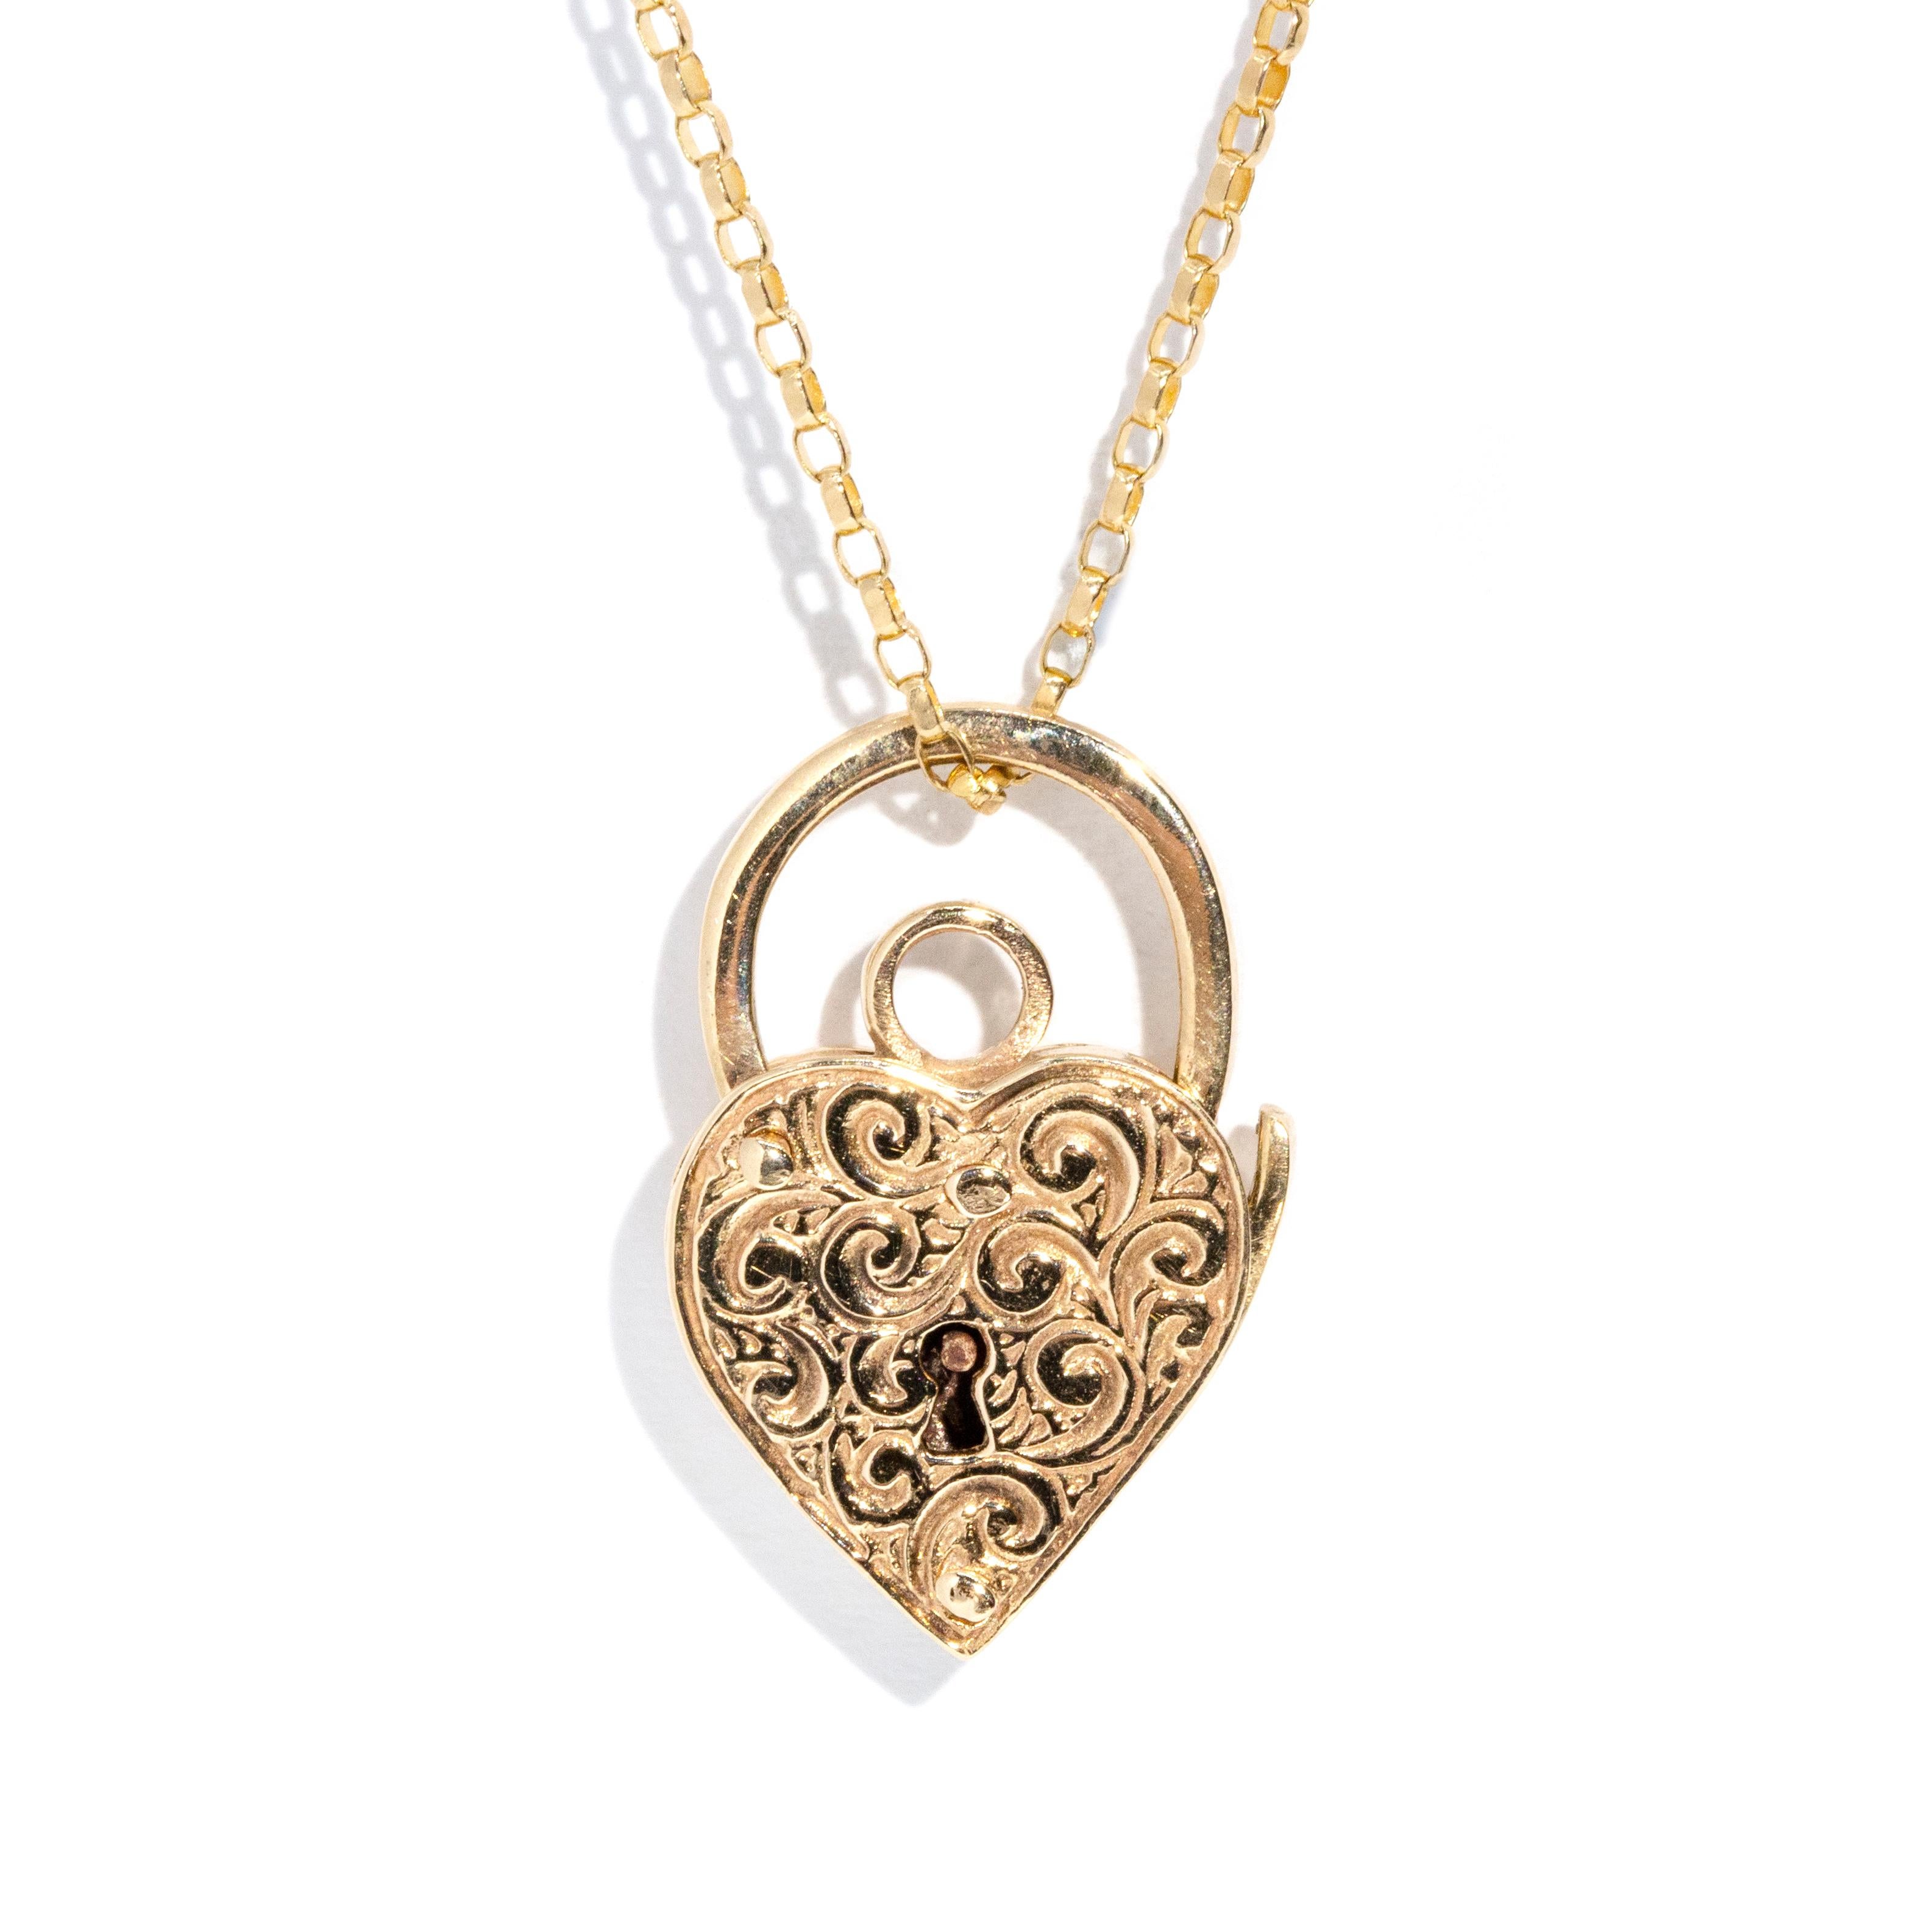 Modern Vintage Circa 1960s Patterned Heart Padlock Pendant & Chain 9 Carat Yellow Gold For Sale